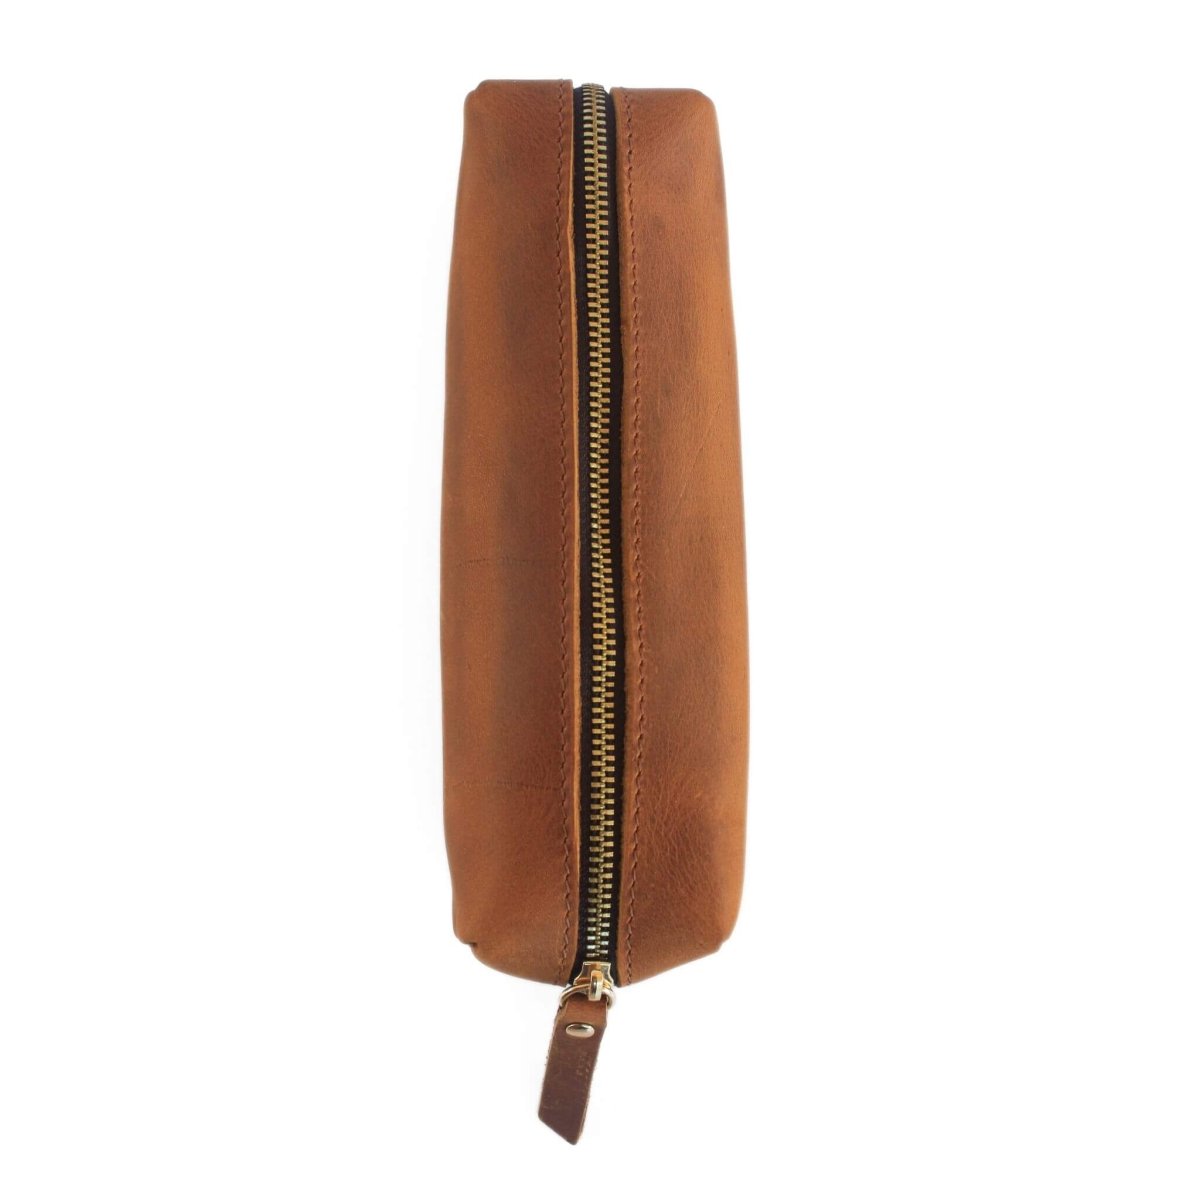 Genuine leather pencil case with gold zip